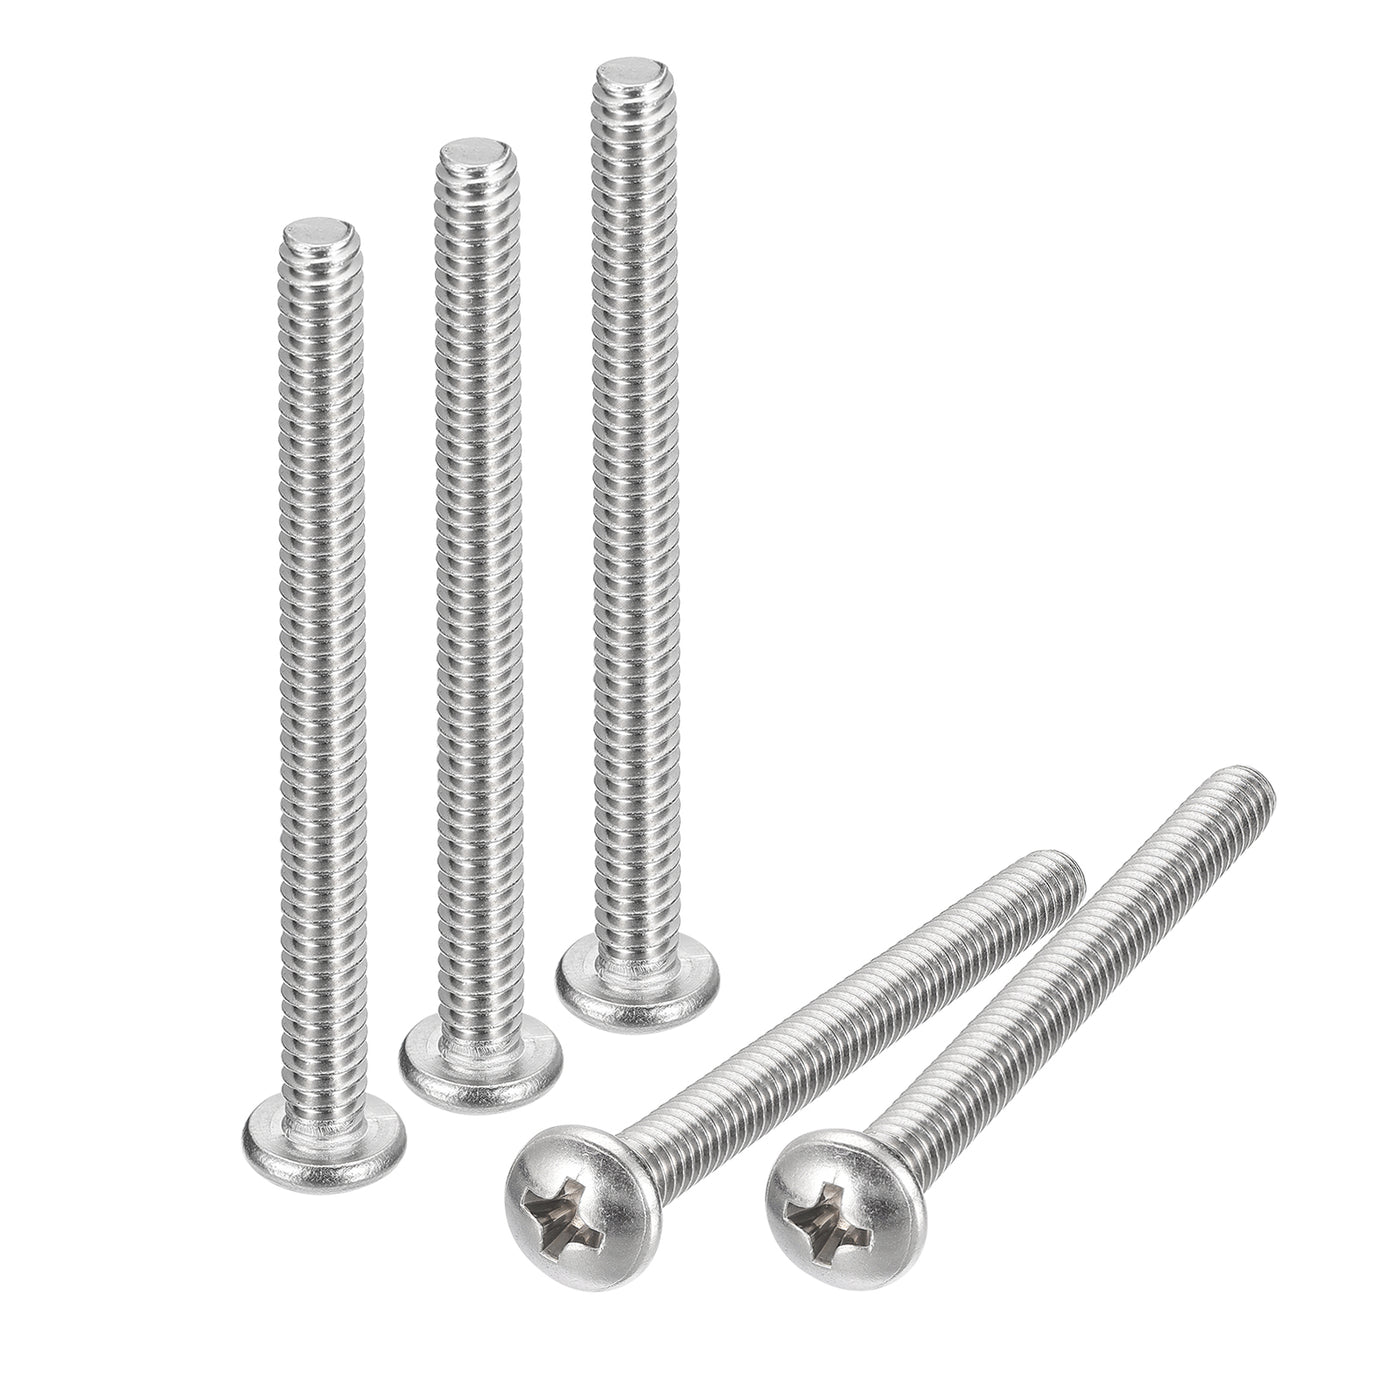 uxcell Uxcell #10-24x3" Pan Head Machine Screws, Stainless Steel 18-8 Screw, Pack of 10